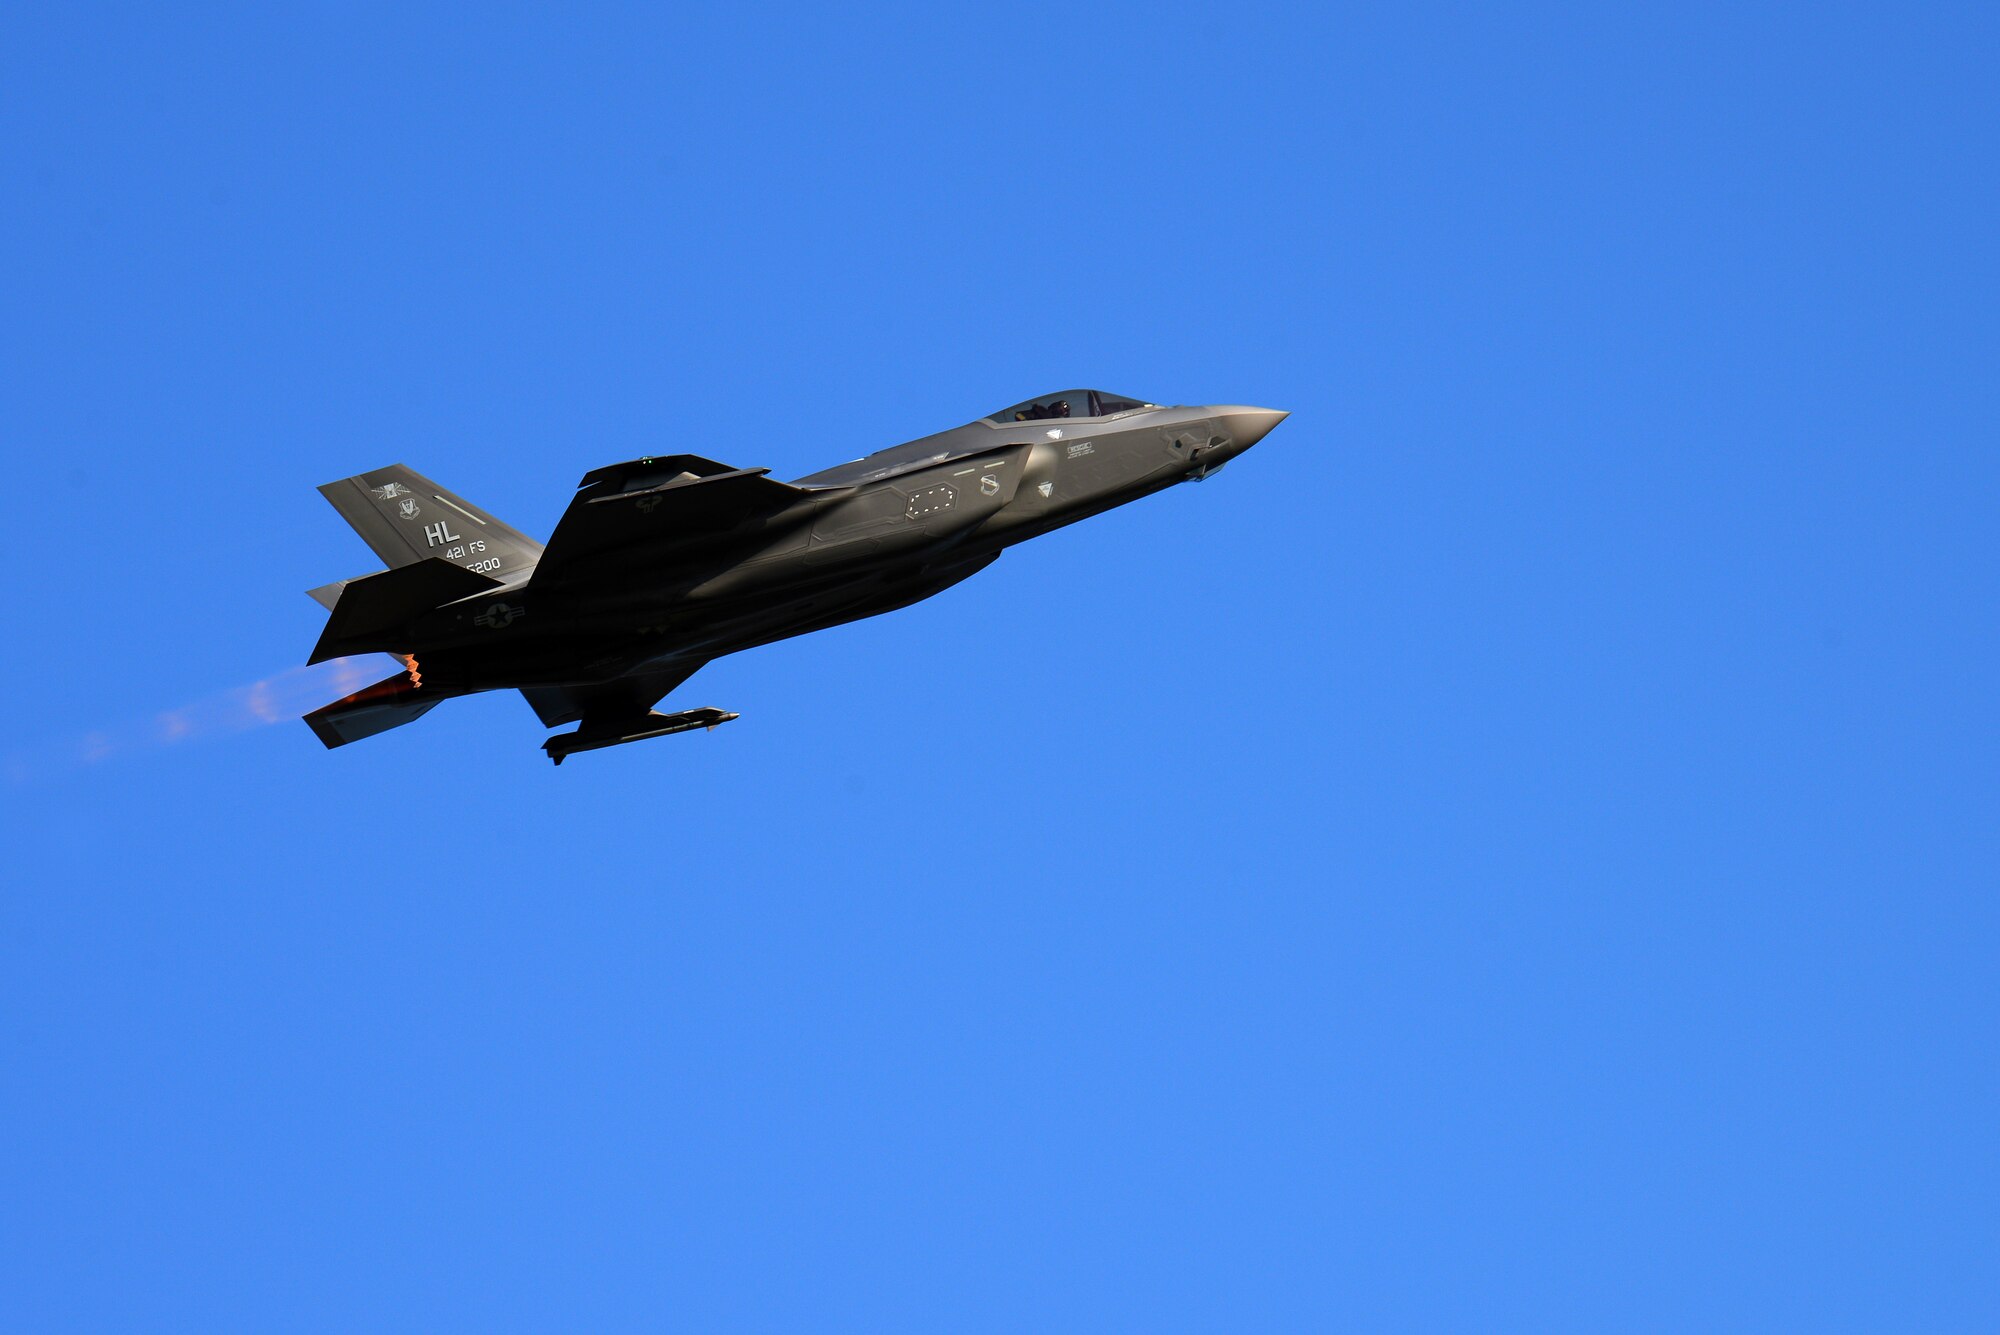 An F-35A Lightning II from the 388th and 419th Fighter Wings, at Hill AFB, Utah, takes off on the first day of Astral Knight 19 at Aviano Air Base, Italy, on June 3, 2019. The F-35 is a 5th generation jet with advanced stealth and fused sensors allowing for enhanced situational awareness. (U.S. Air Force photo by Airman 1st Class Caleb House)